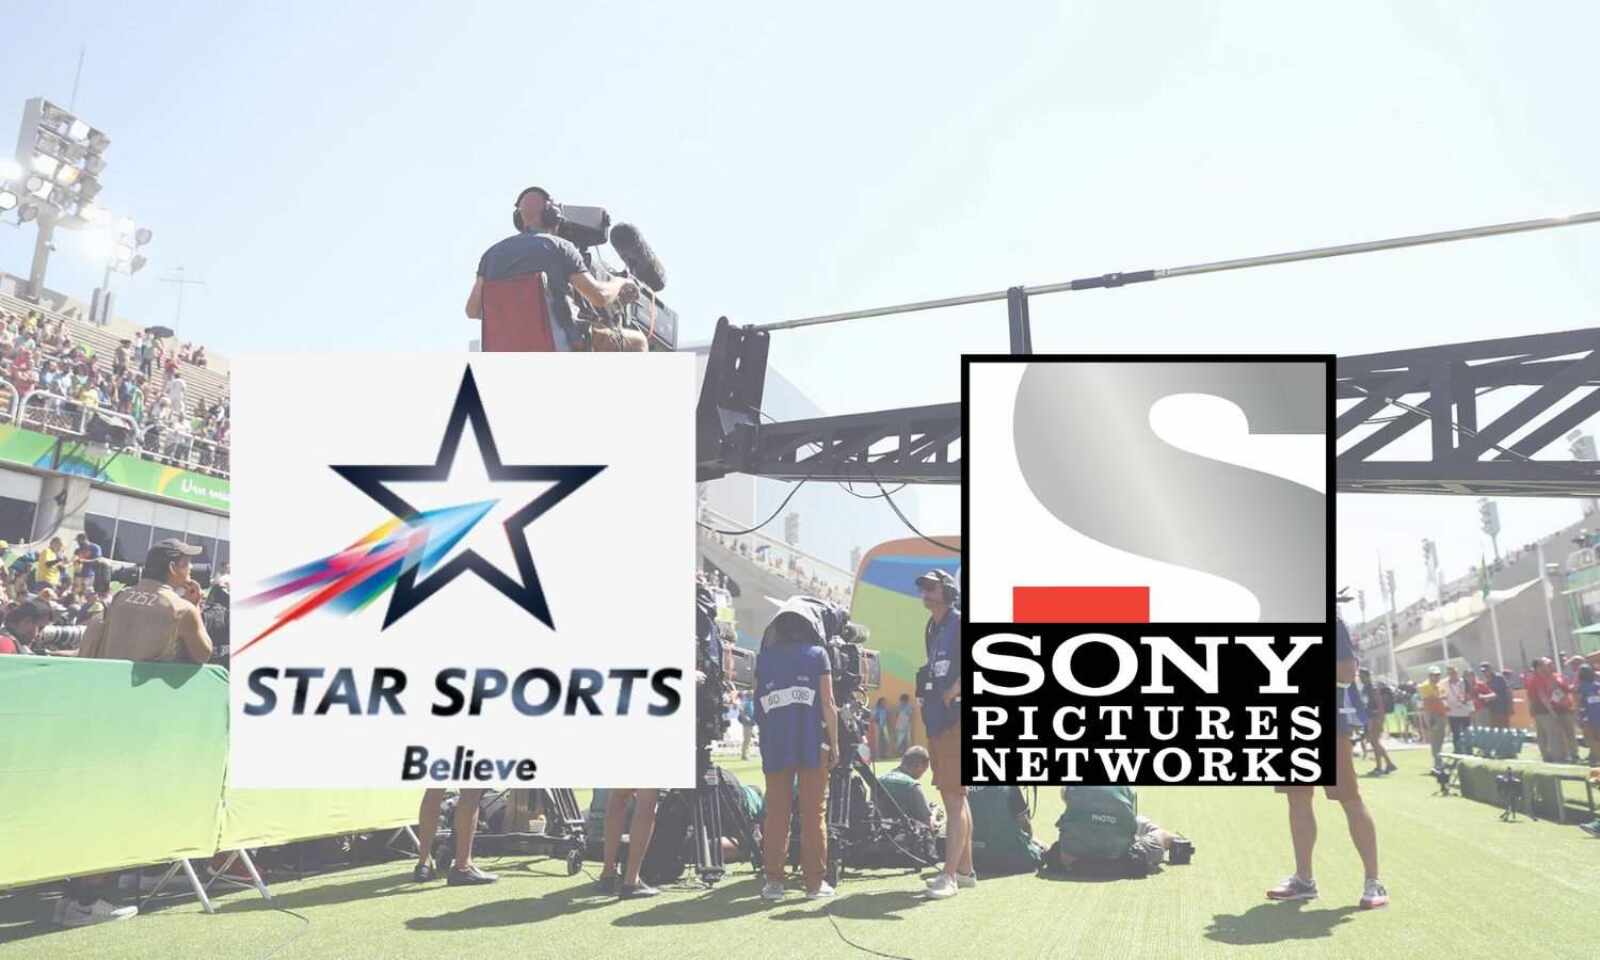 Sony vs Star Who is dominating the sports broadcasting game in India?